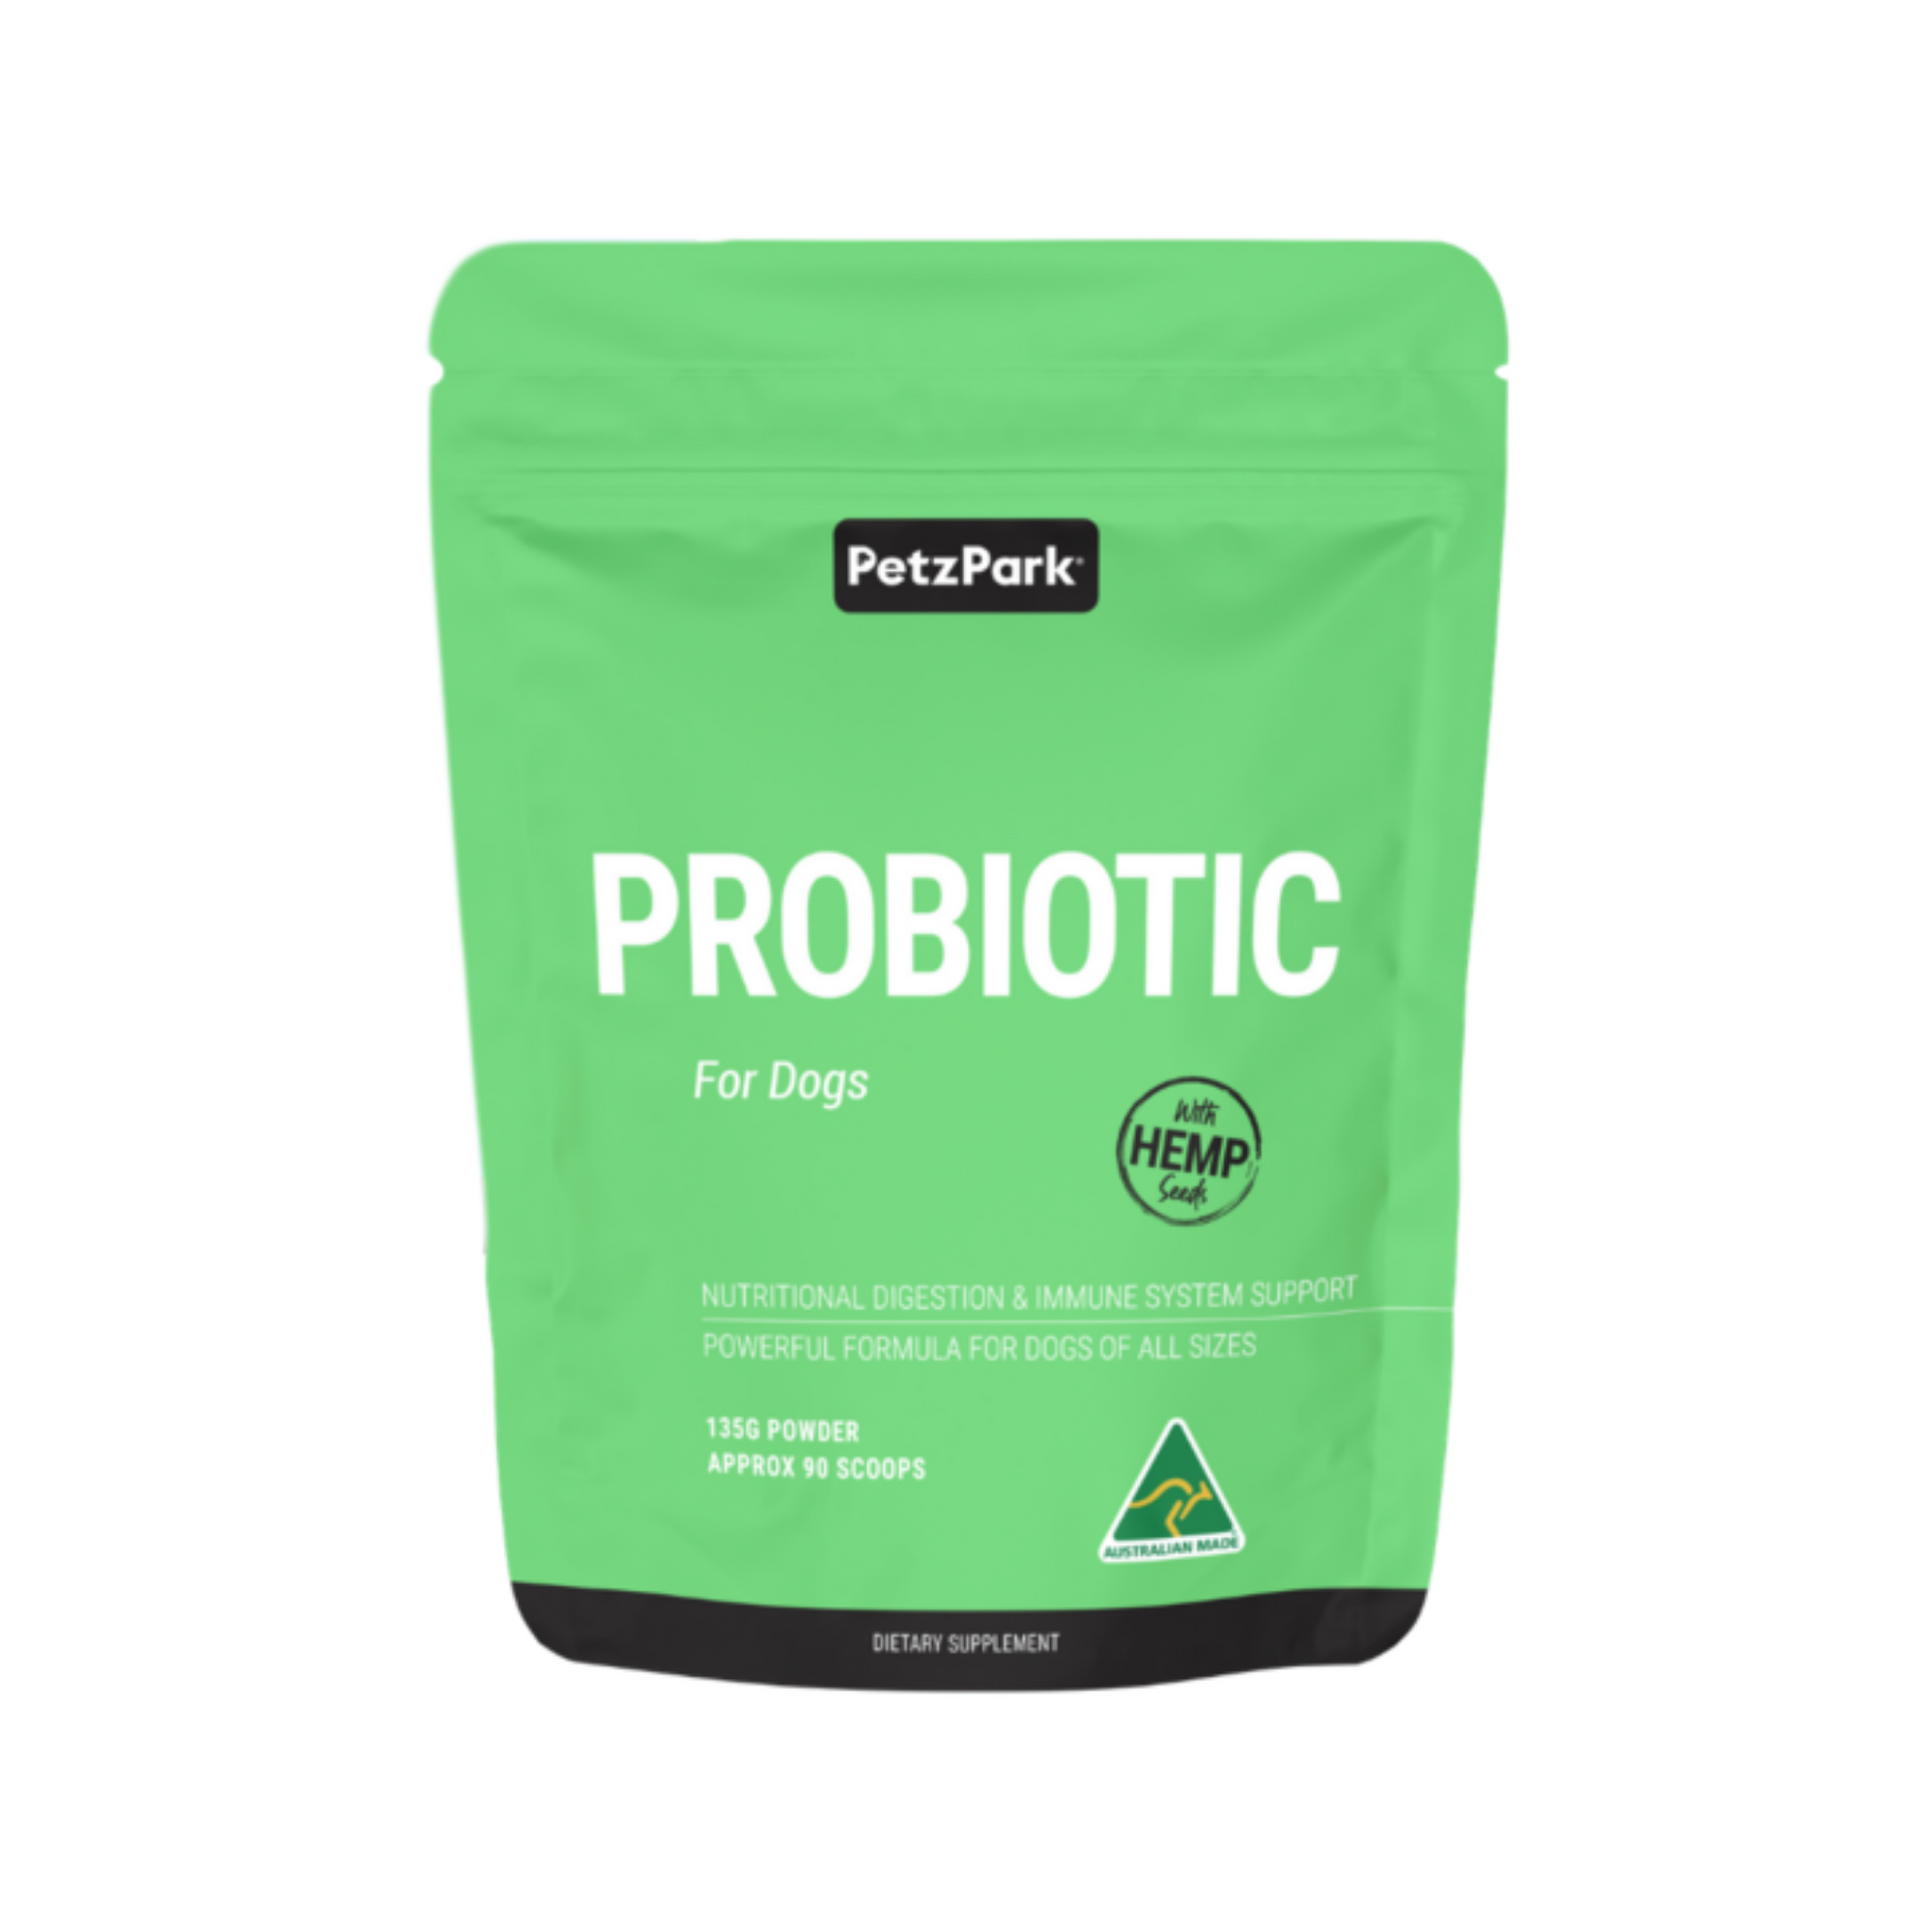 probiotic for dogs by von hound and friends